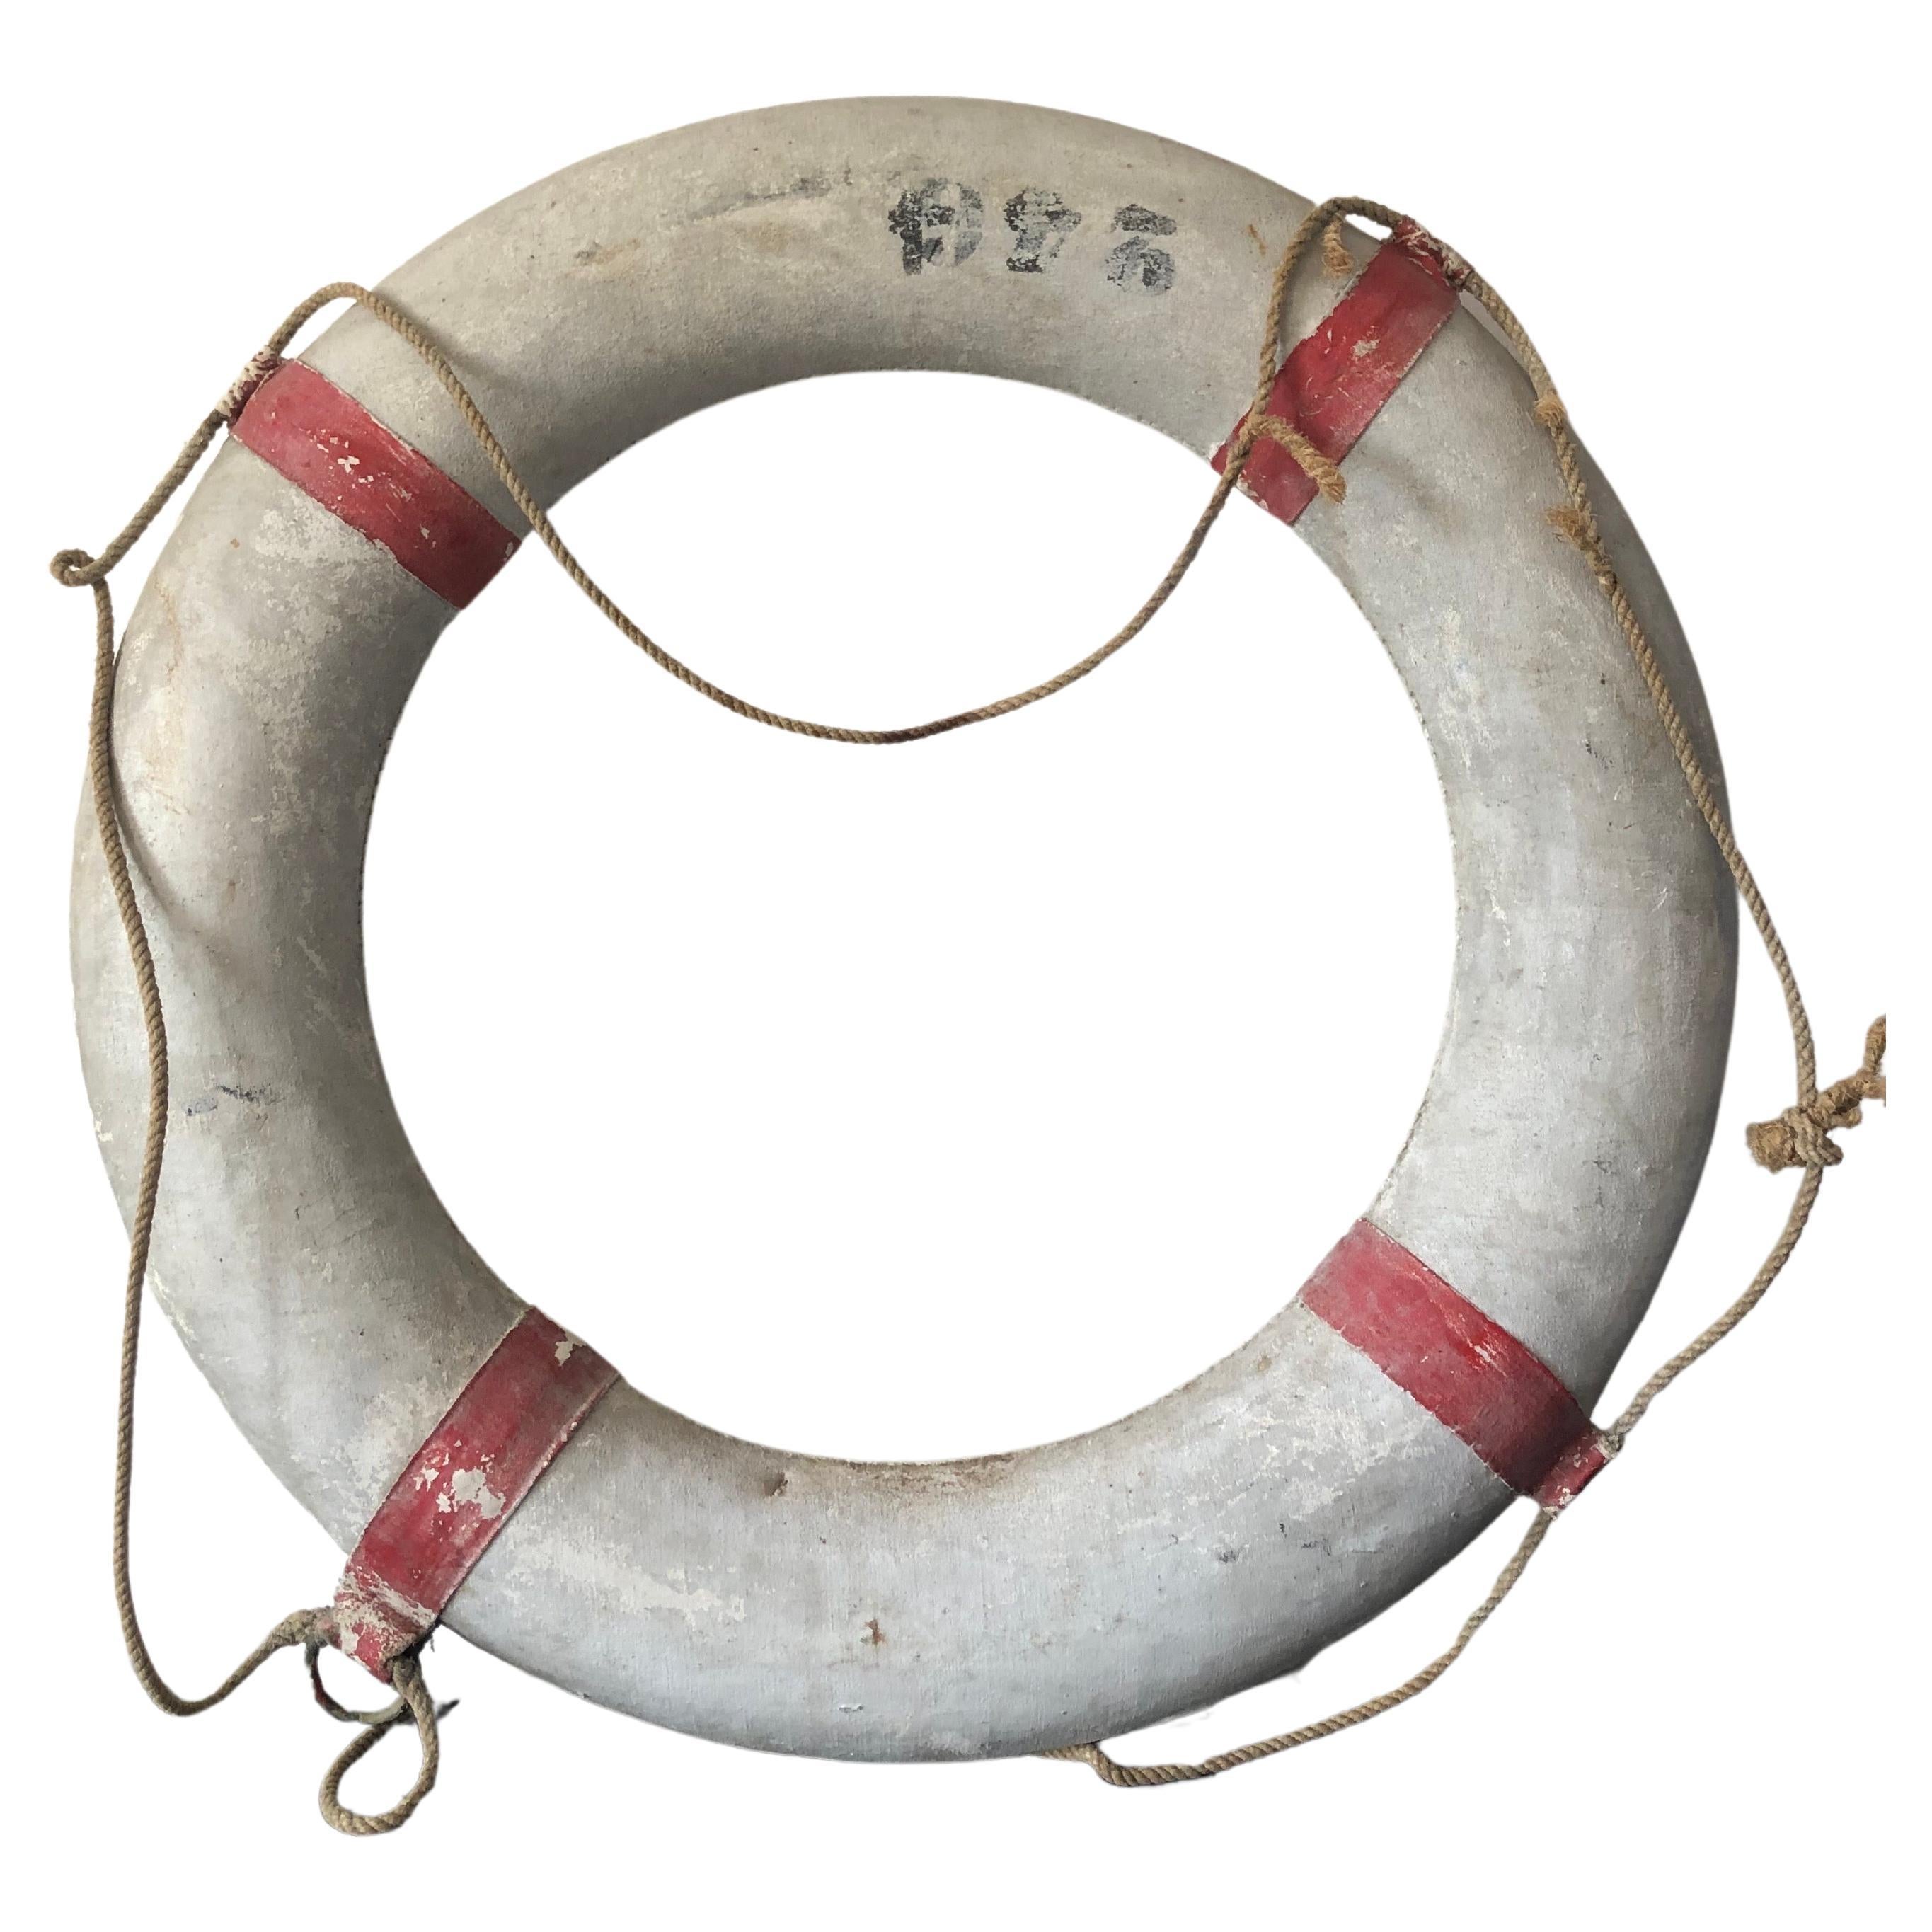 A vintage lifebuoy from a French ship, early 20th century. For Sale